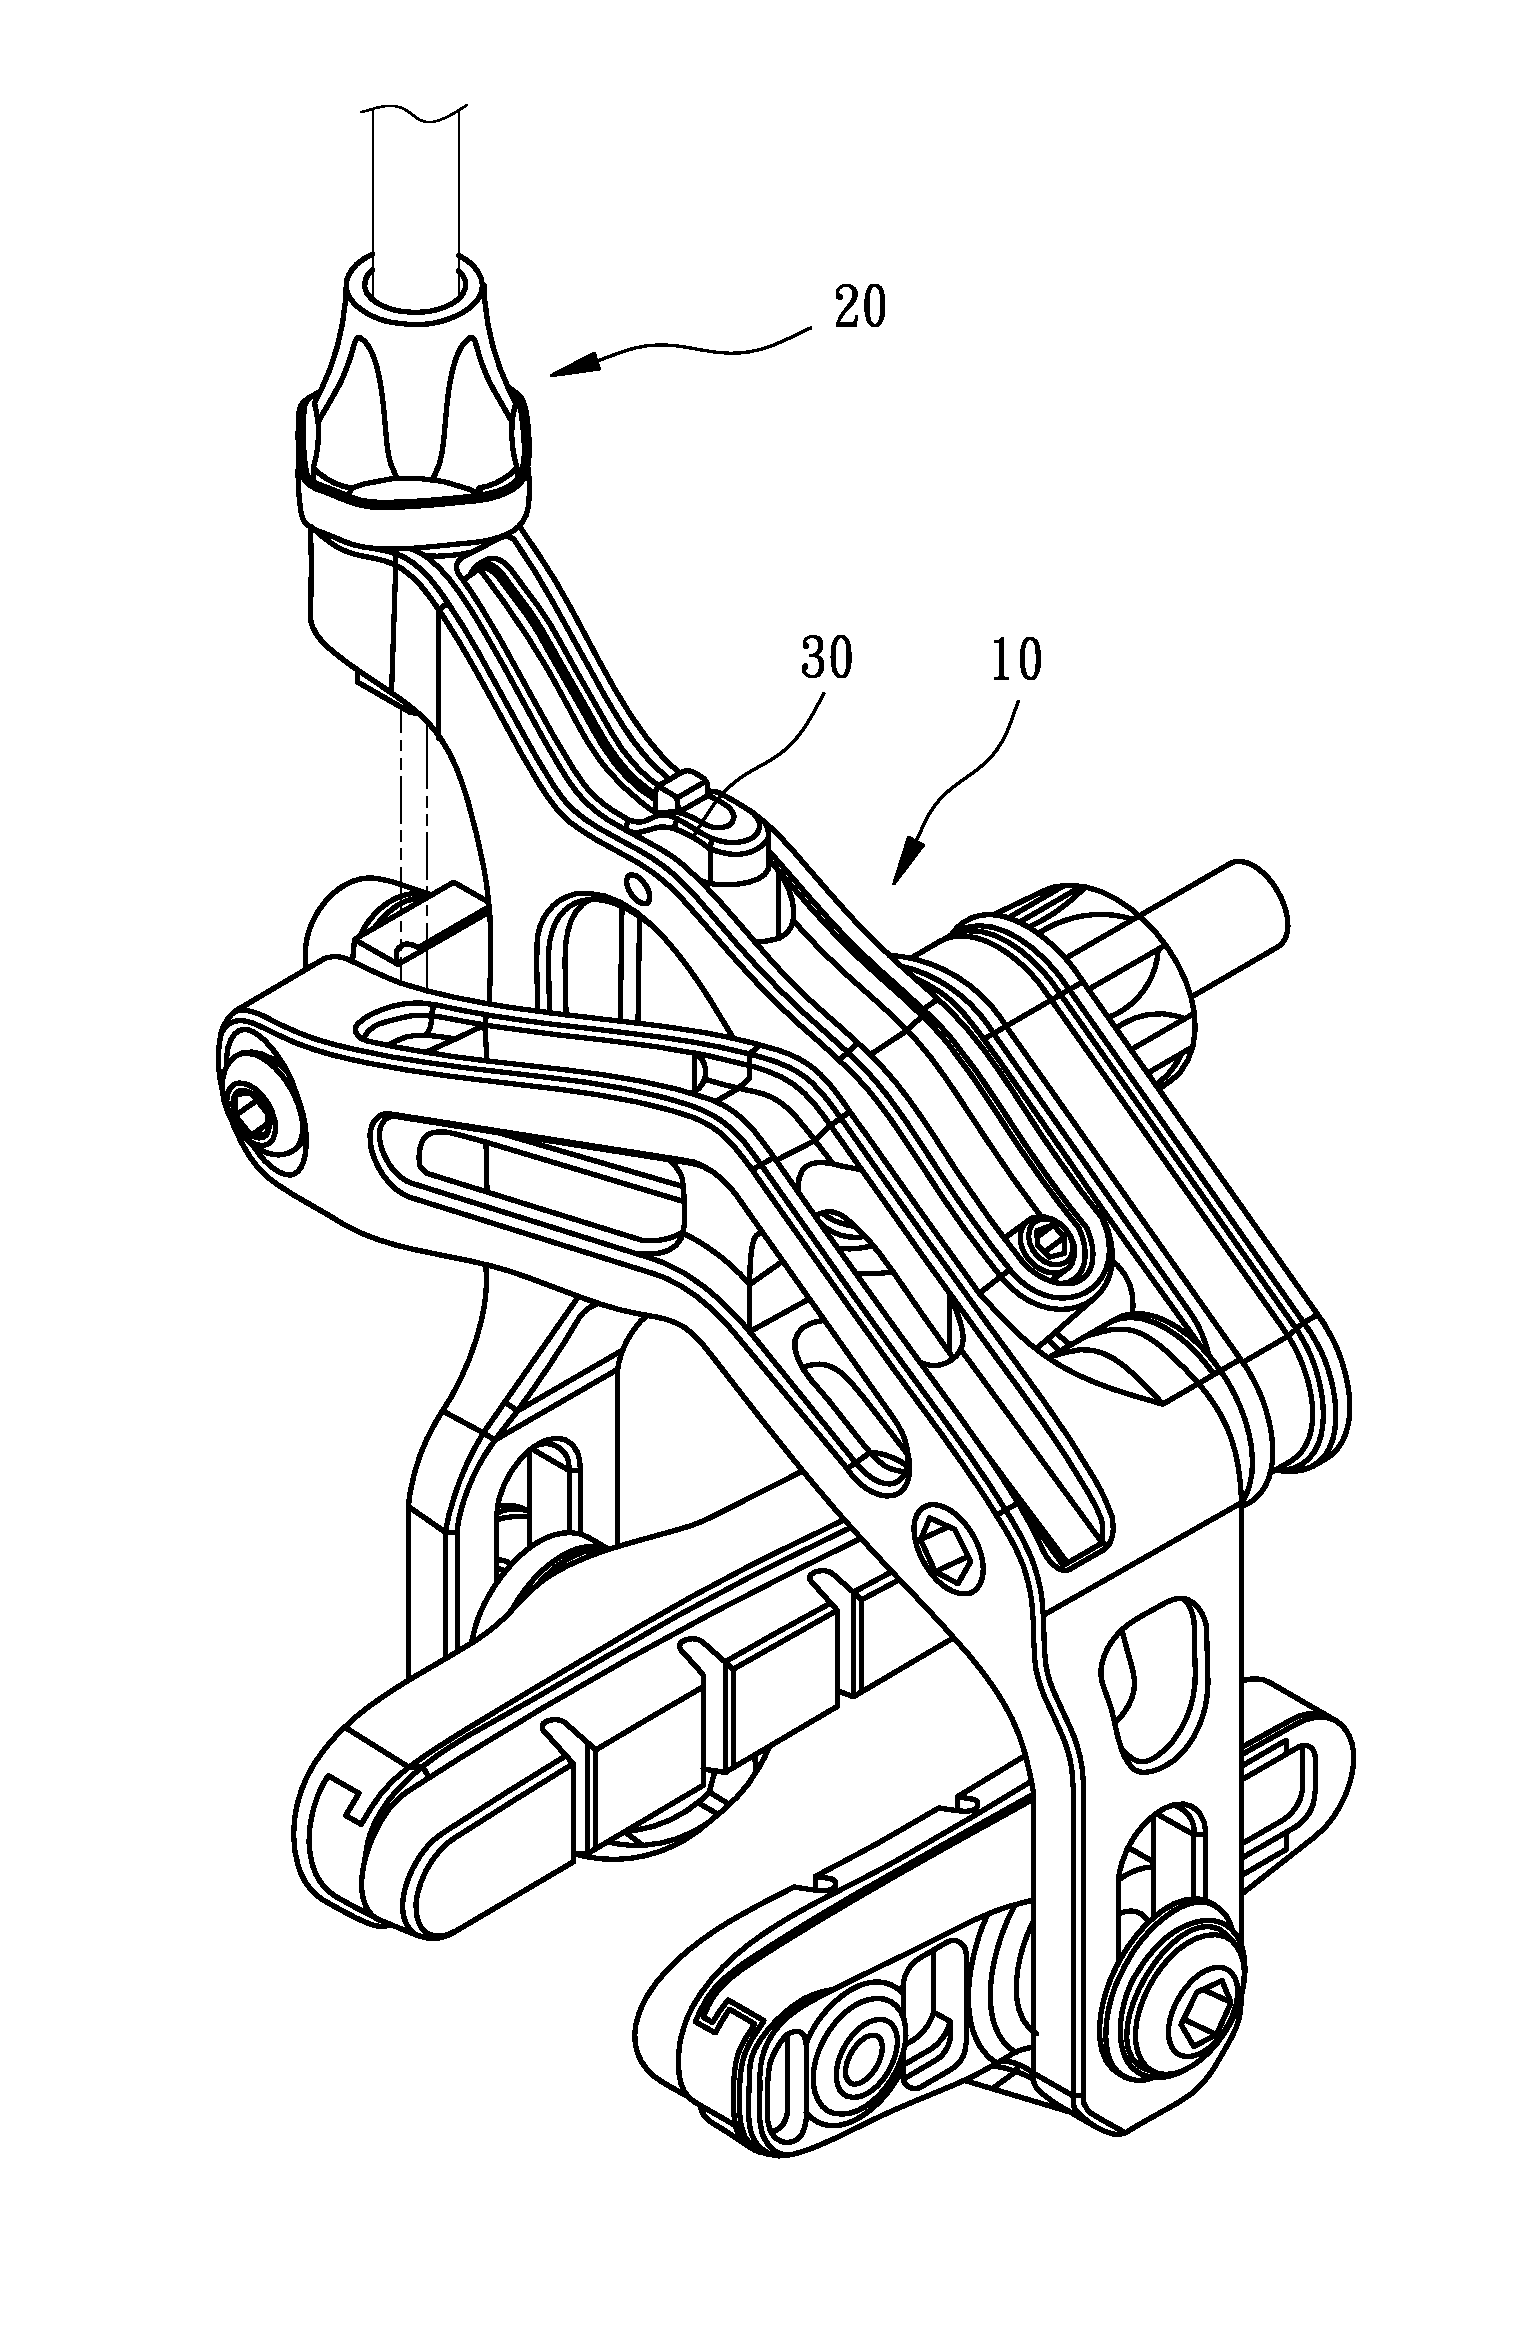 Quick-release device of a bicycle brake cable